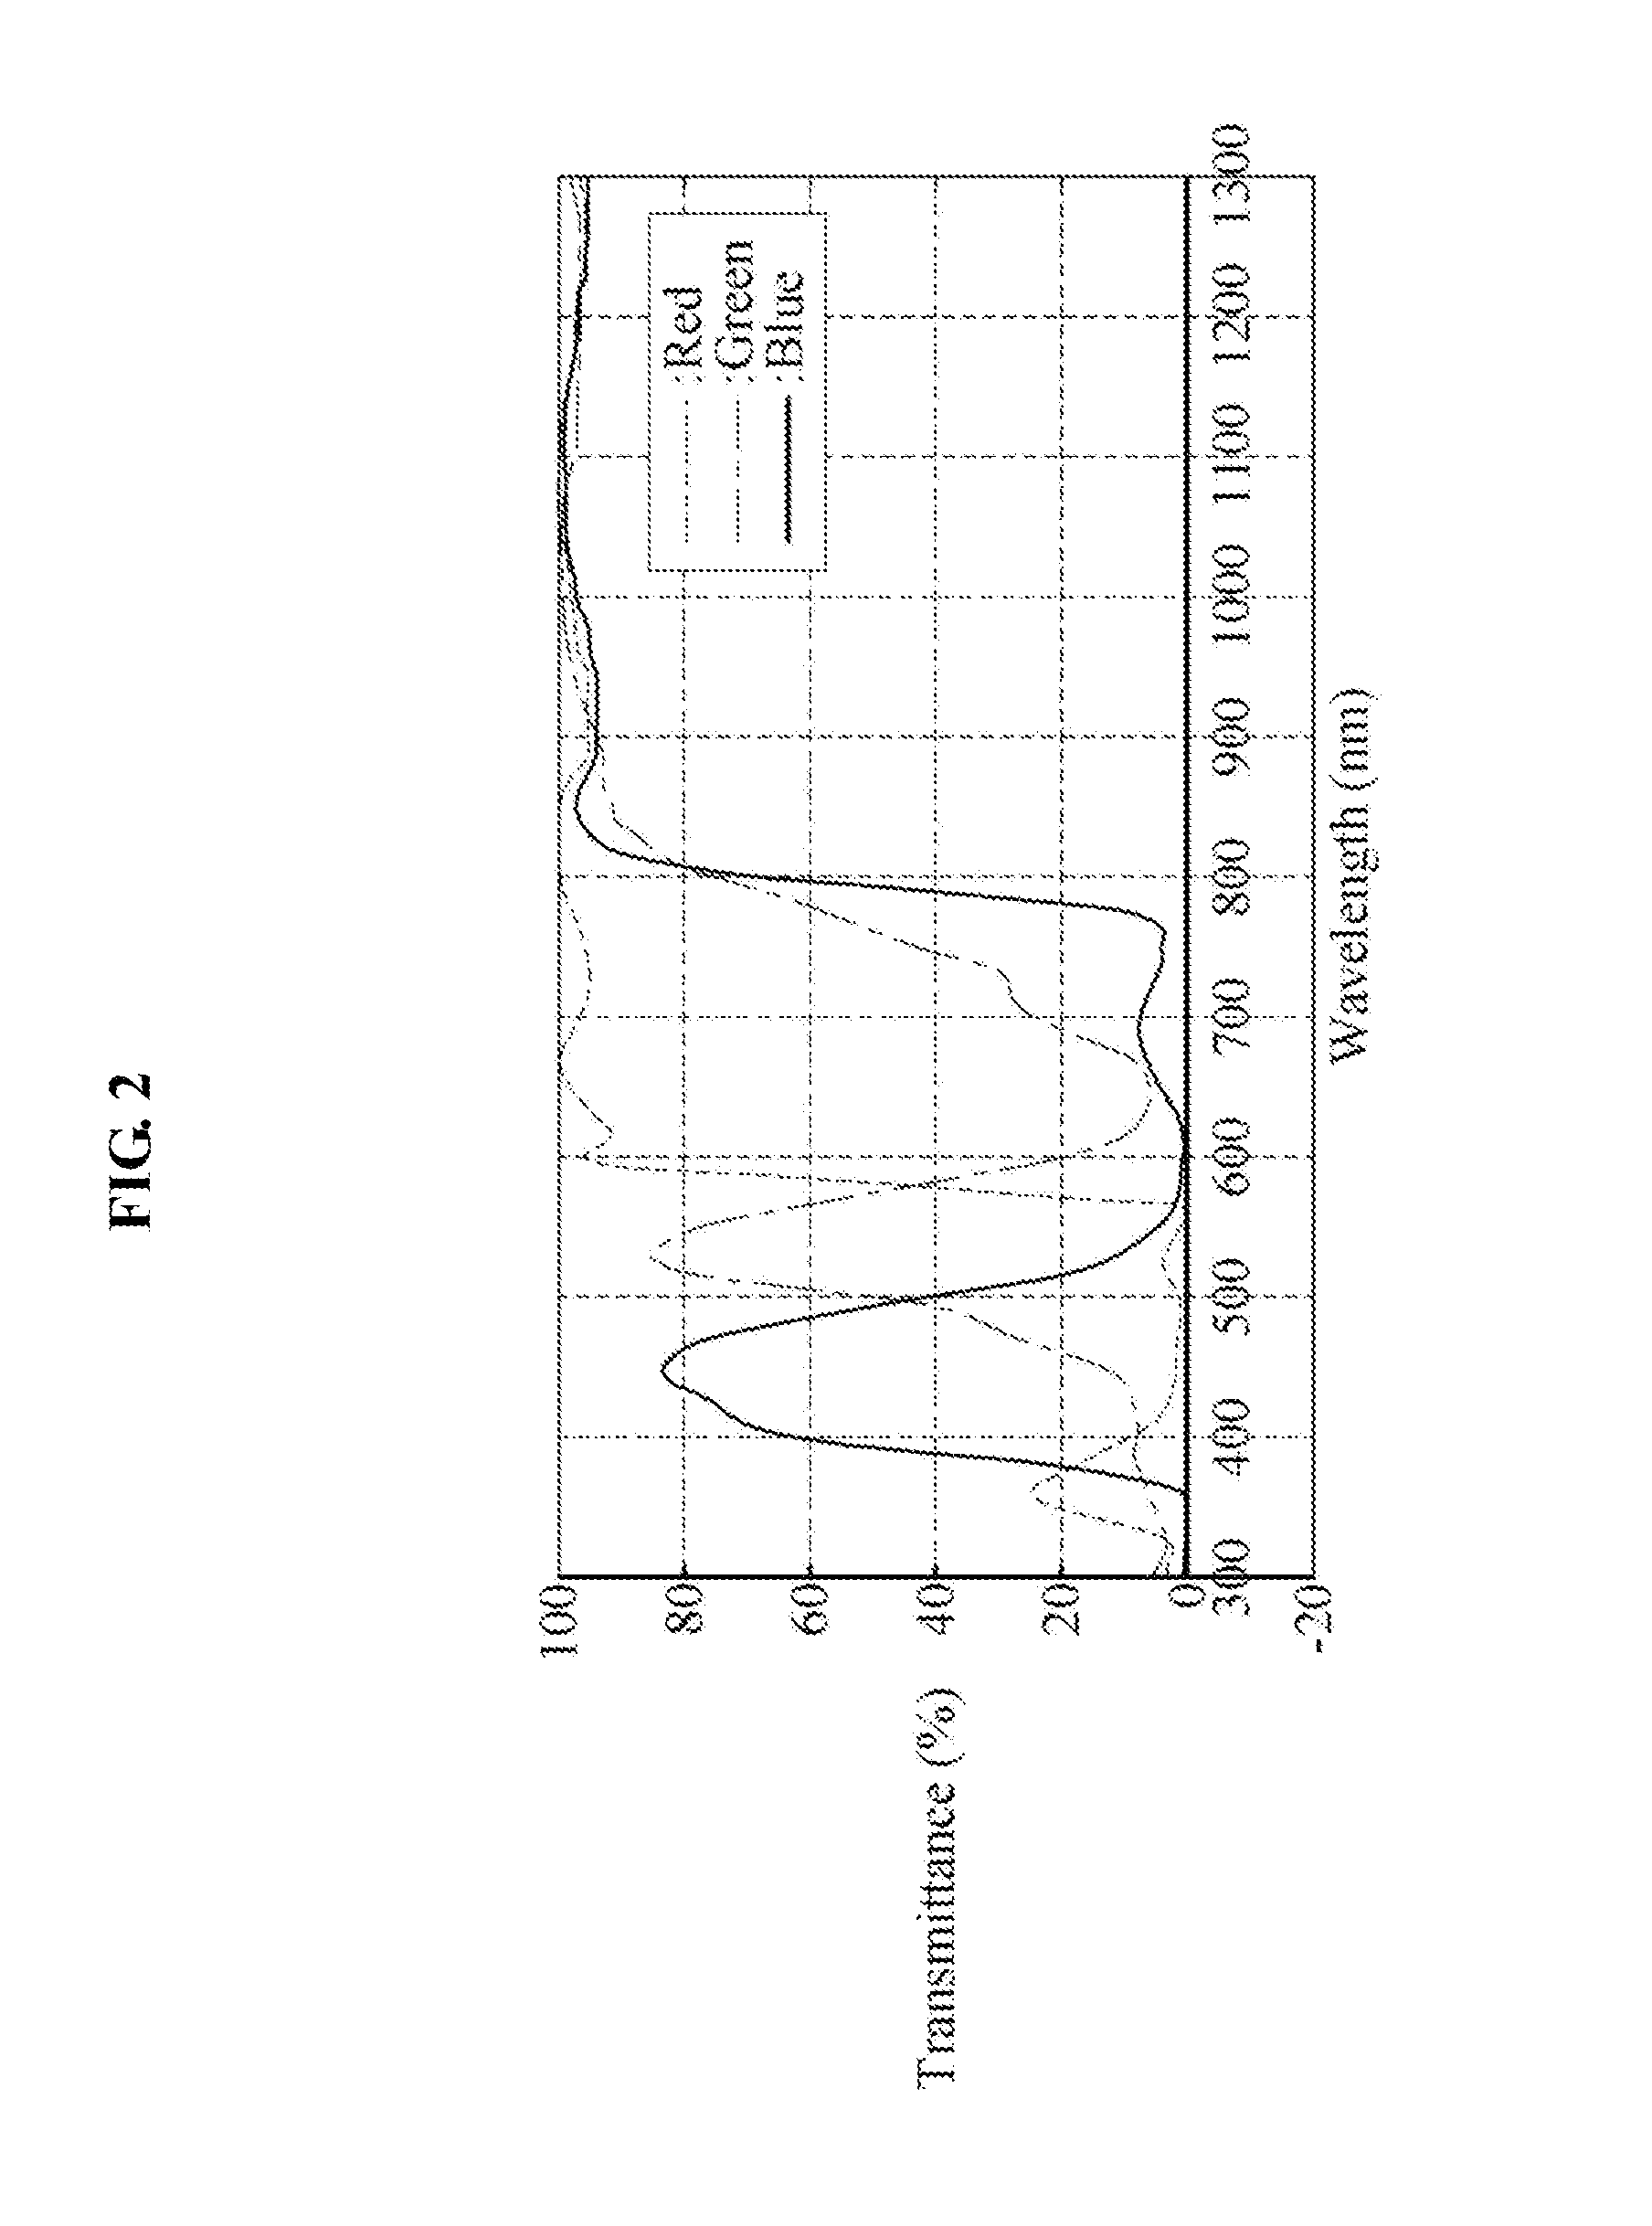 Apparatus and method for eye tracking under high and low illumination conditions